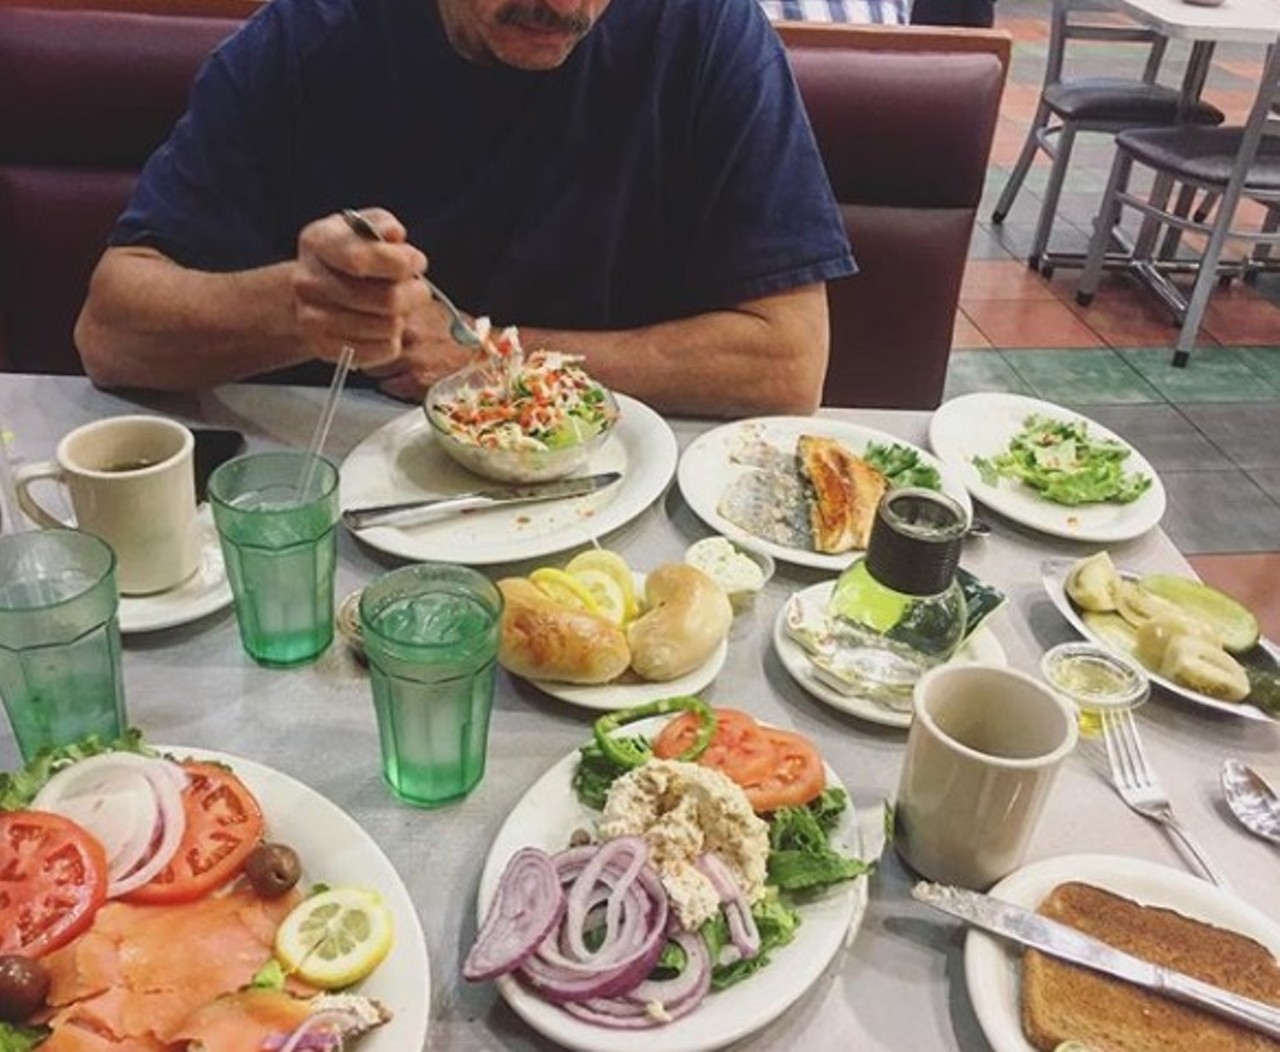 Best Deli: Corky and Lenny's 
27091 Chagrin Blvd, Woodmere,  (216) 464-3838
Photo via avafagin/Instagram